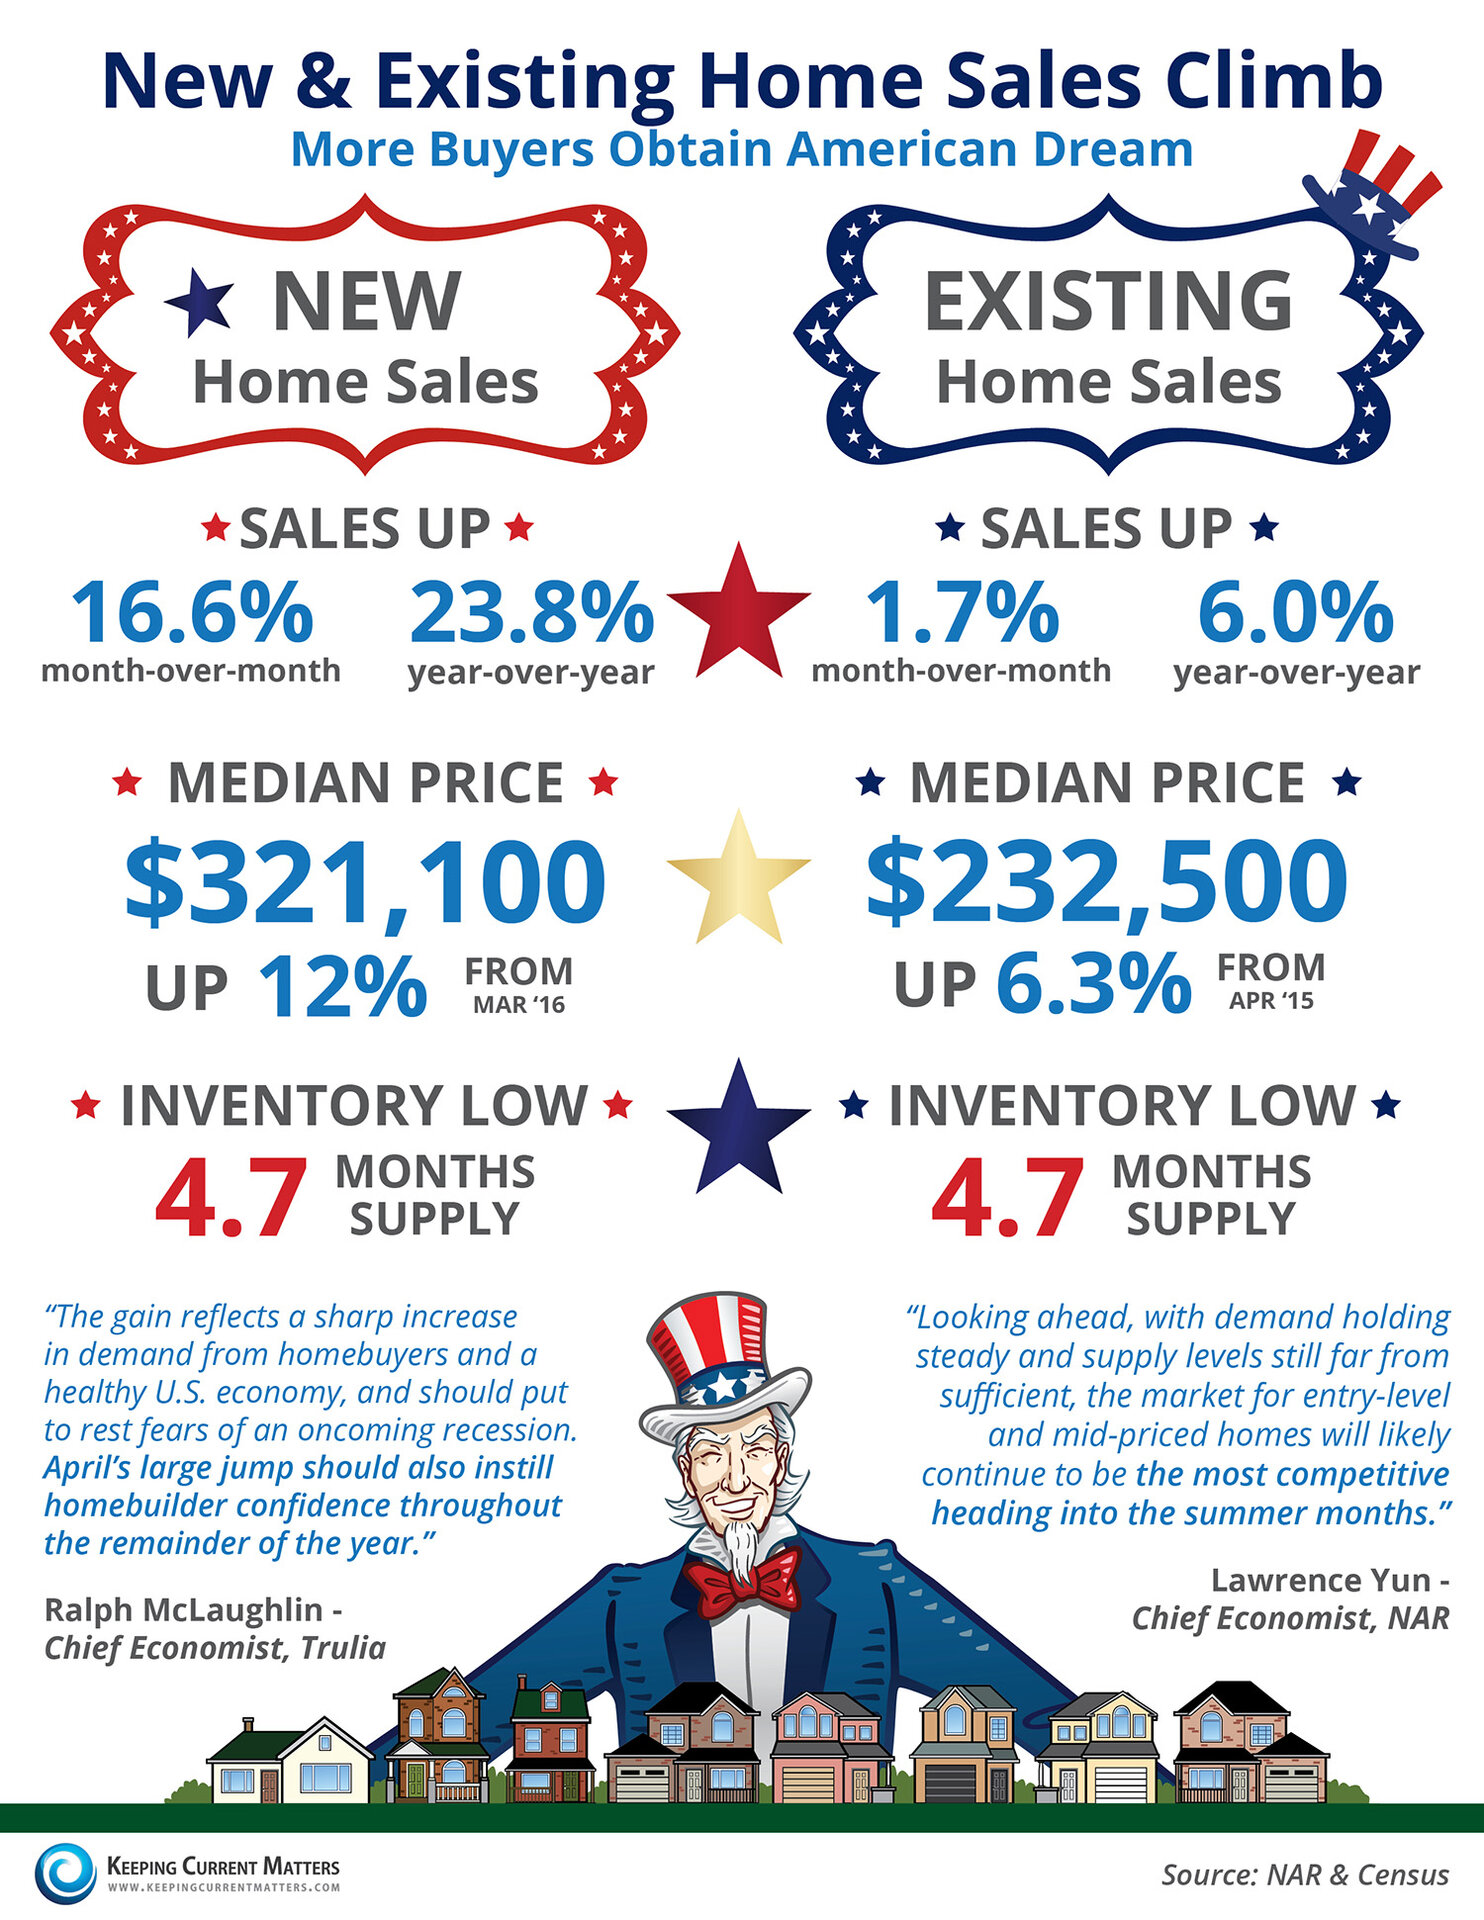 New & Existing Home Sales Climb [INFOGRAPHIC] | Keeping Current Matters